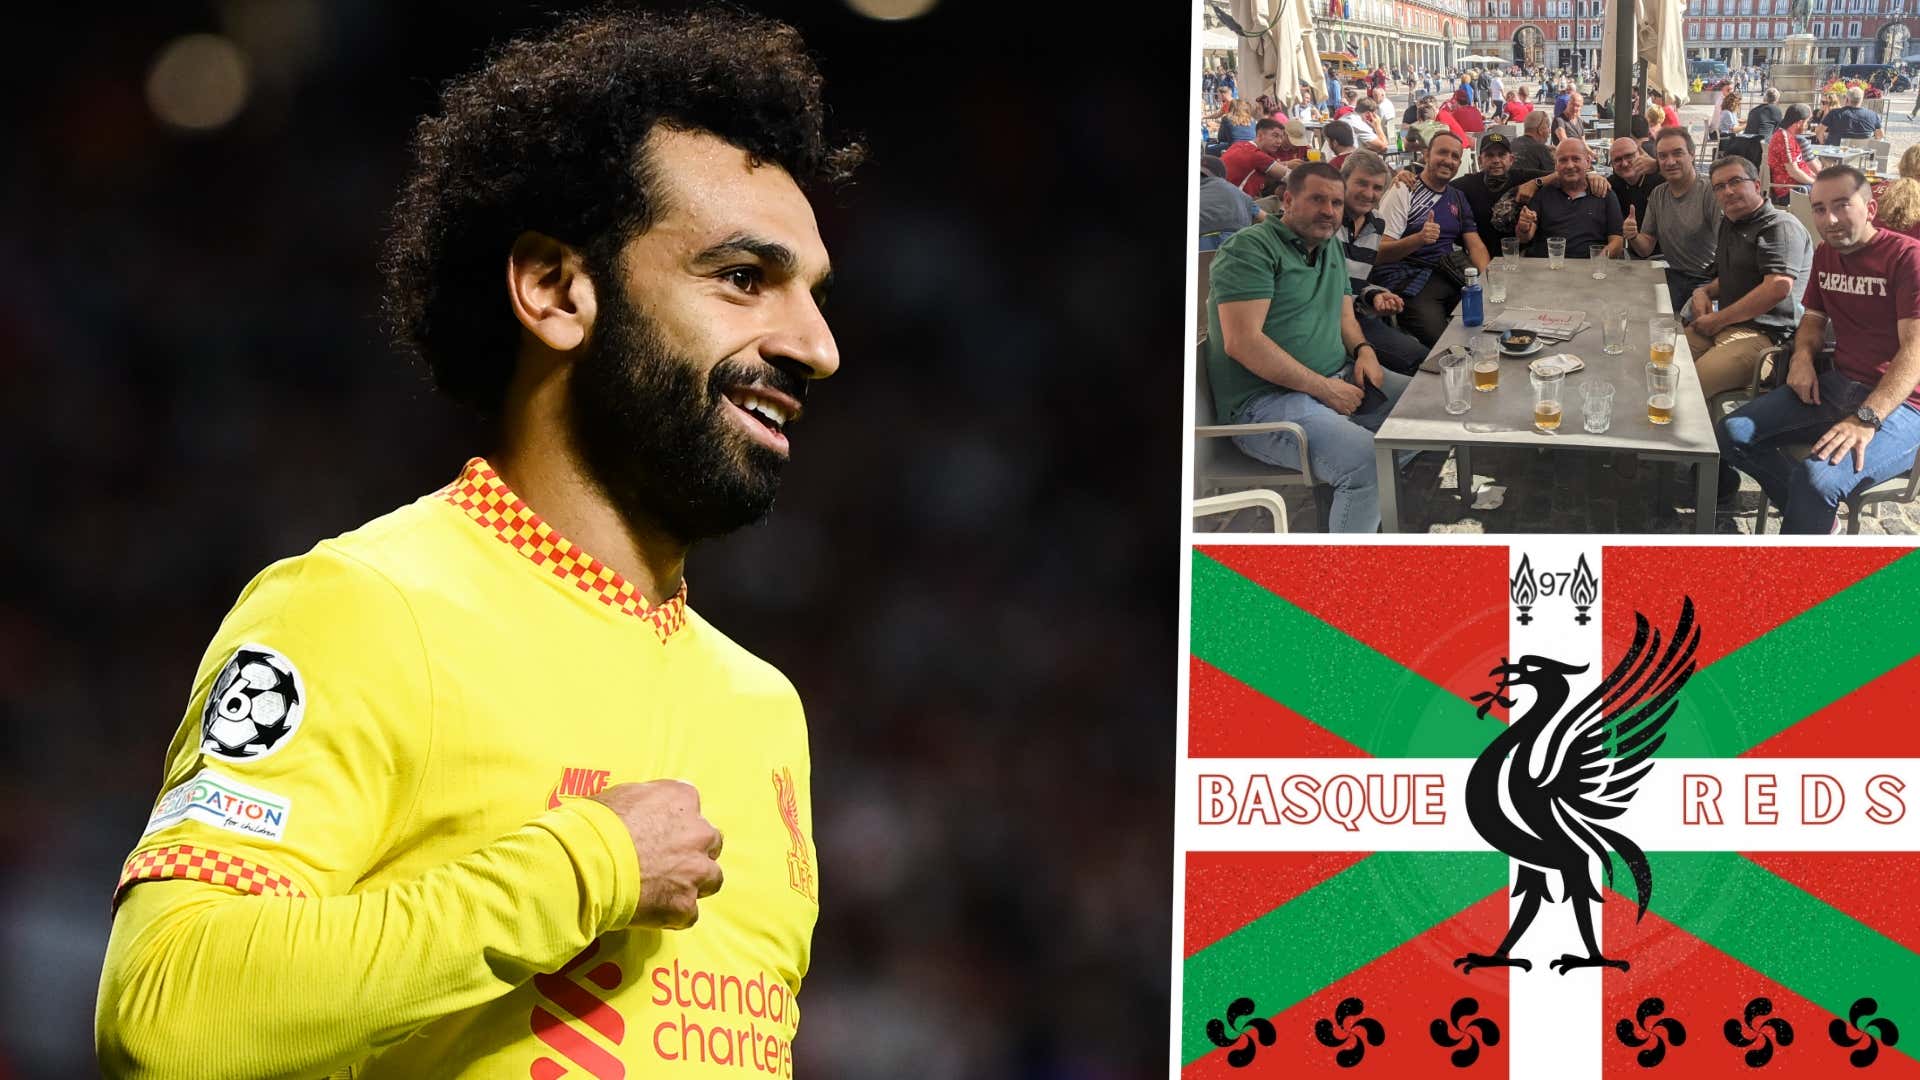 'Liverpool is our religion' - Madrid a timely reminder of football's sense of community